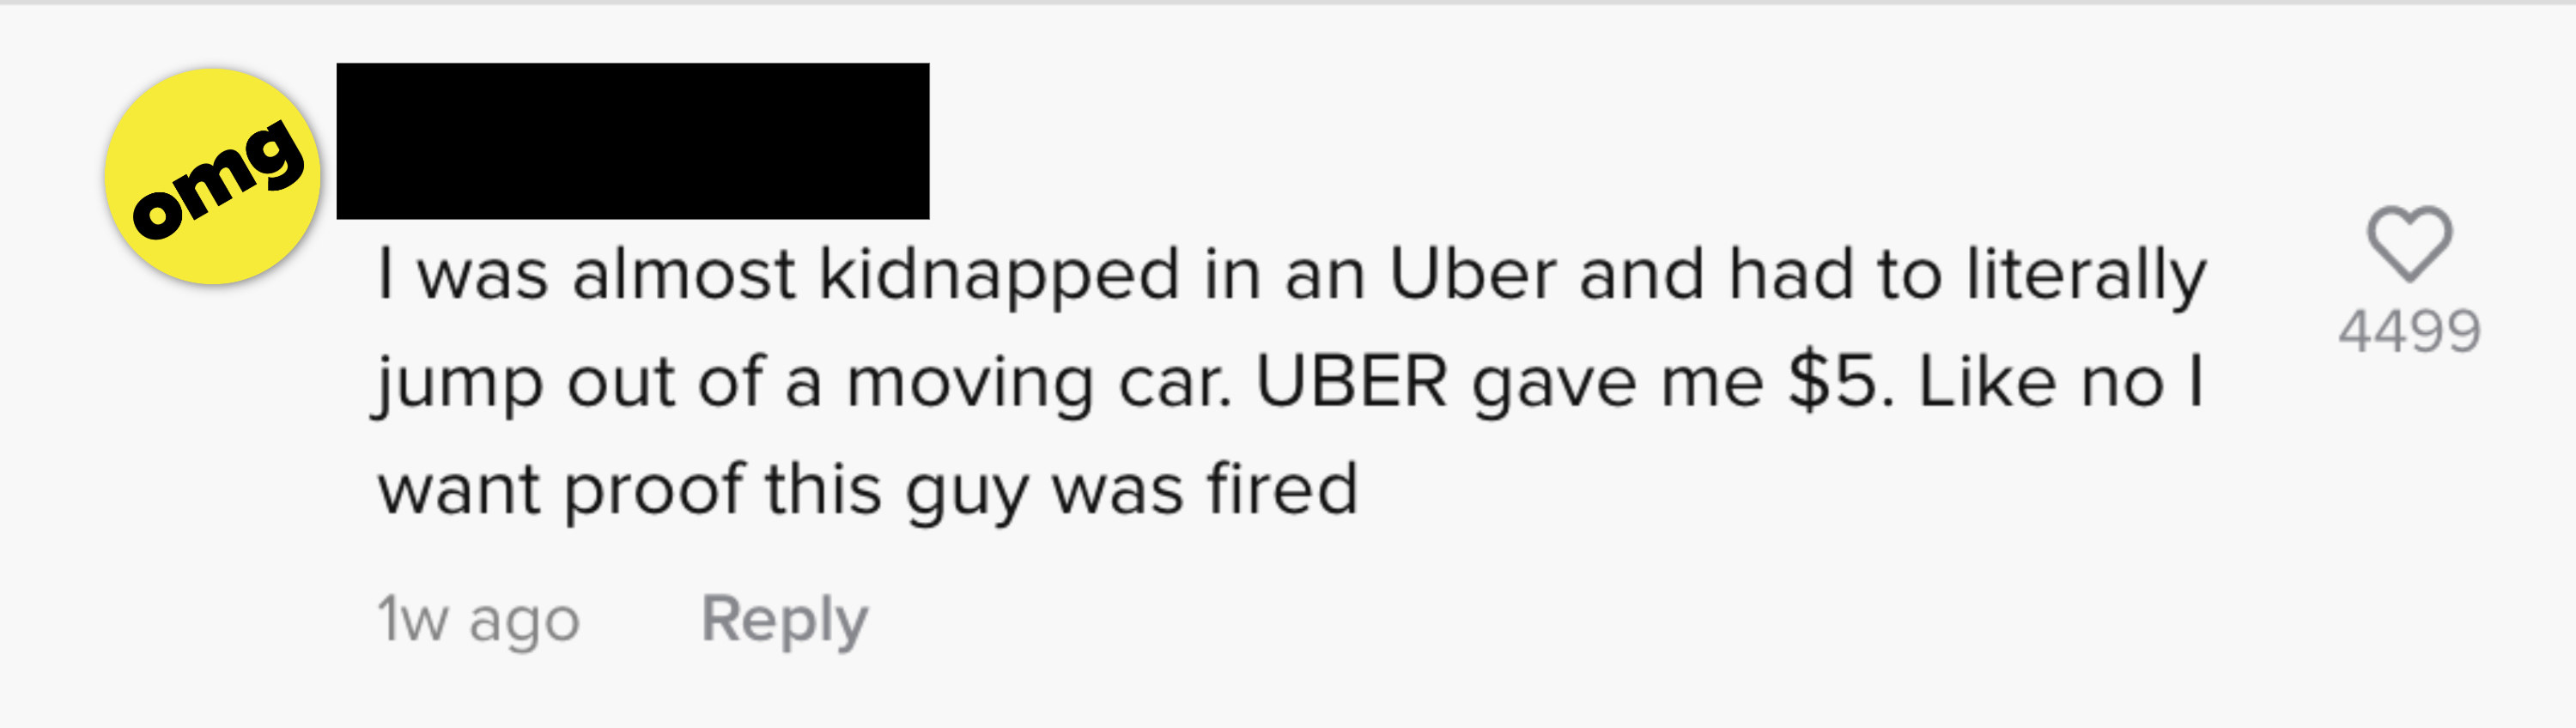 I was almost kidnapped in an uber and had to literally jump out of a moving car. uber gave me $5. like, no i want proof this guy was fired